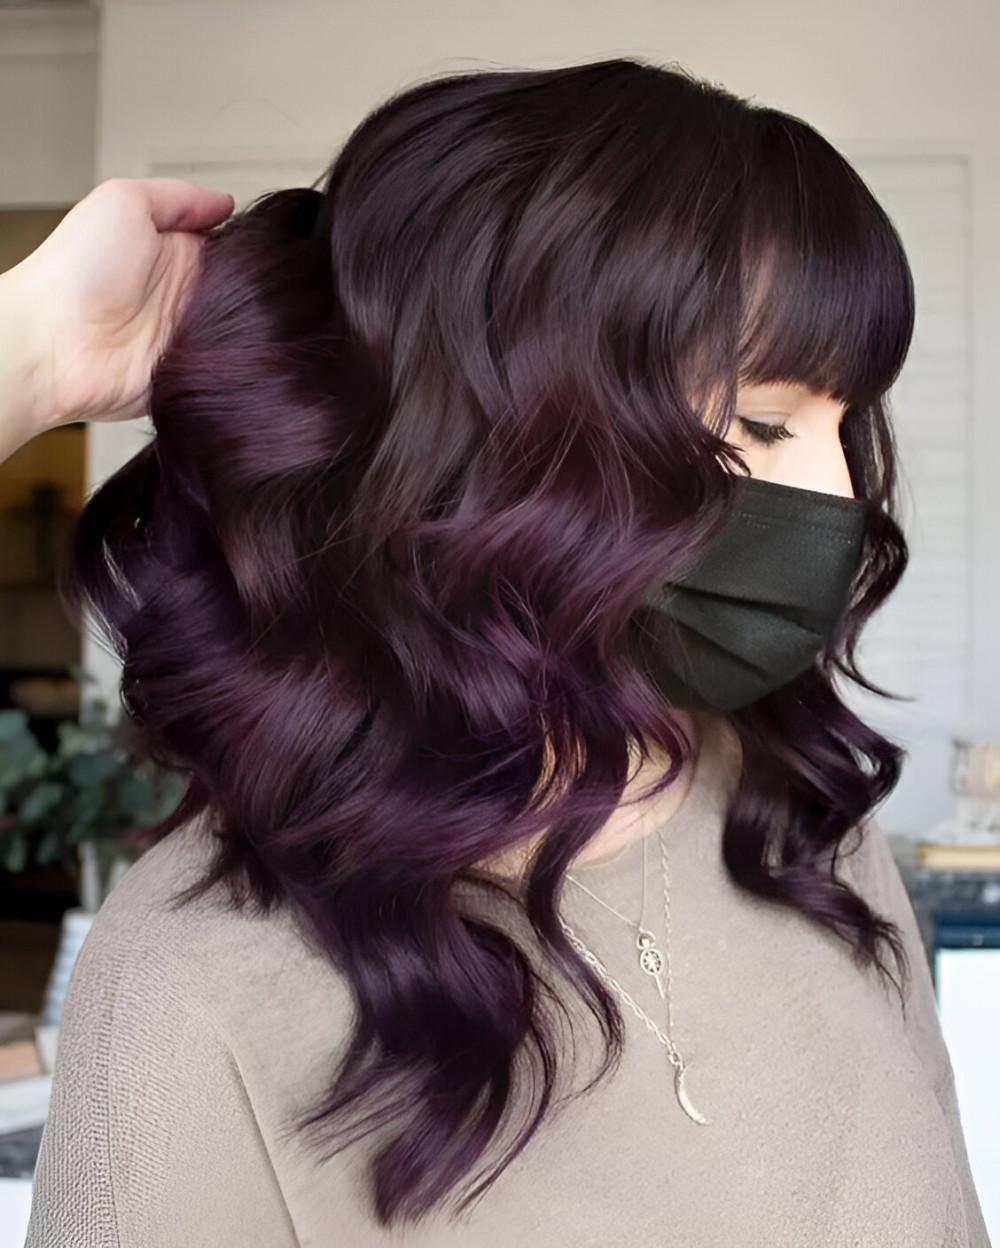 Become A Model With These 27 Gorgeous Plum Hair Color Ideas - 197